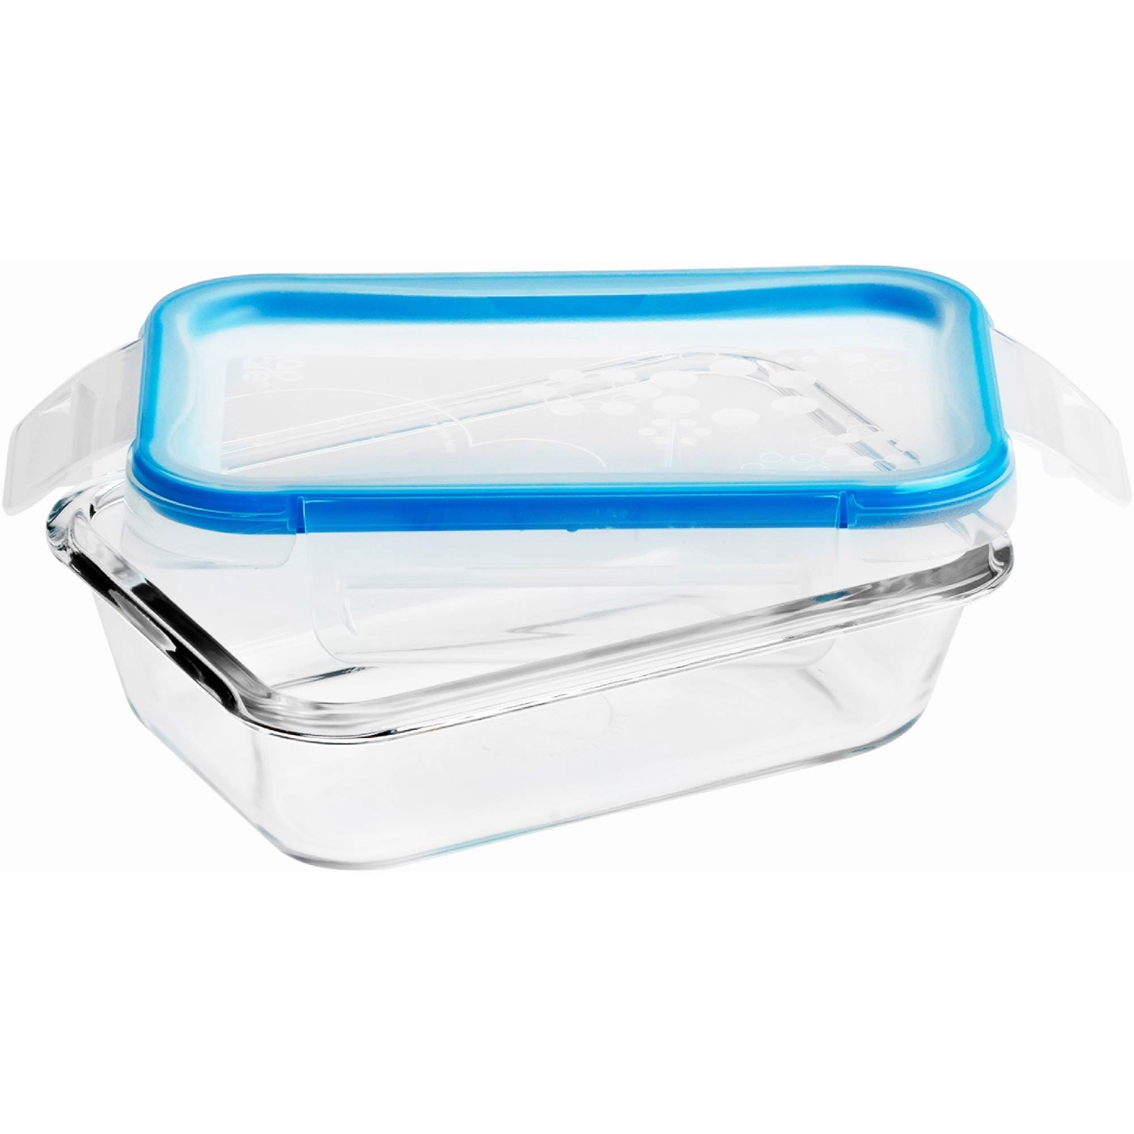 Snapware Total Solution Pyrex 4-piece Glass Food Storage Container Set